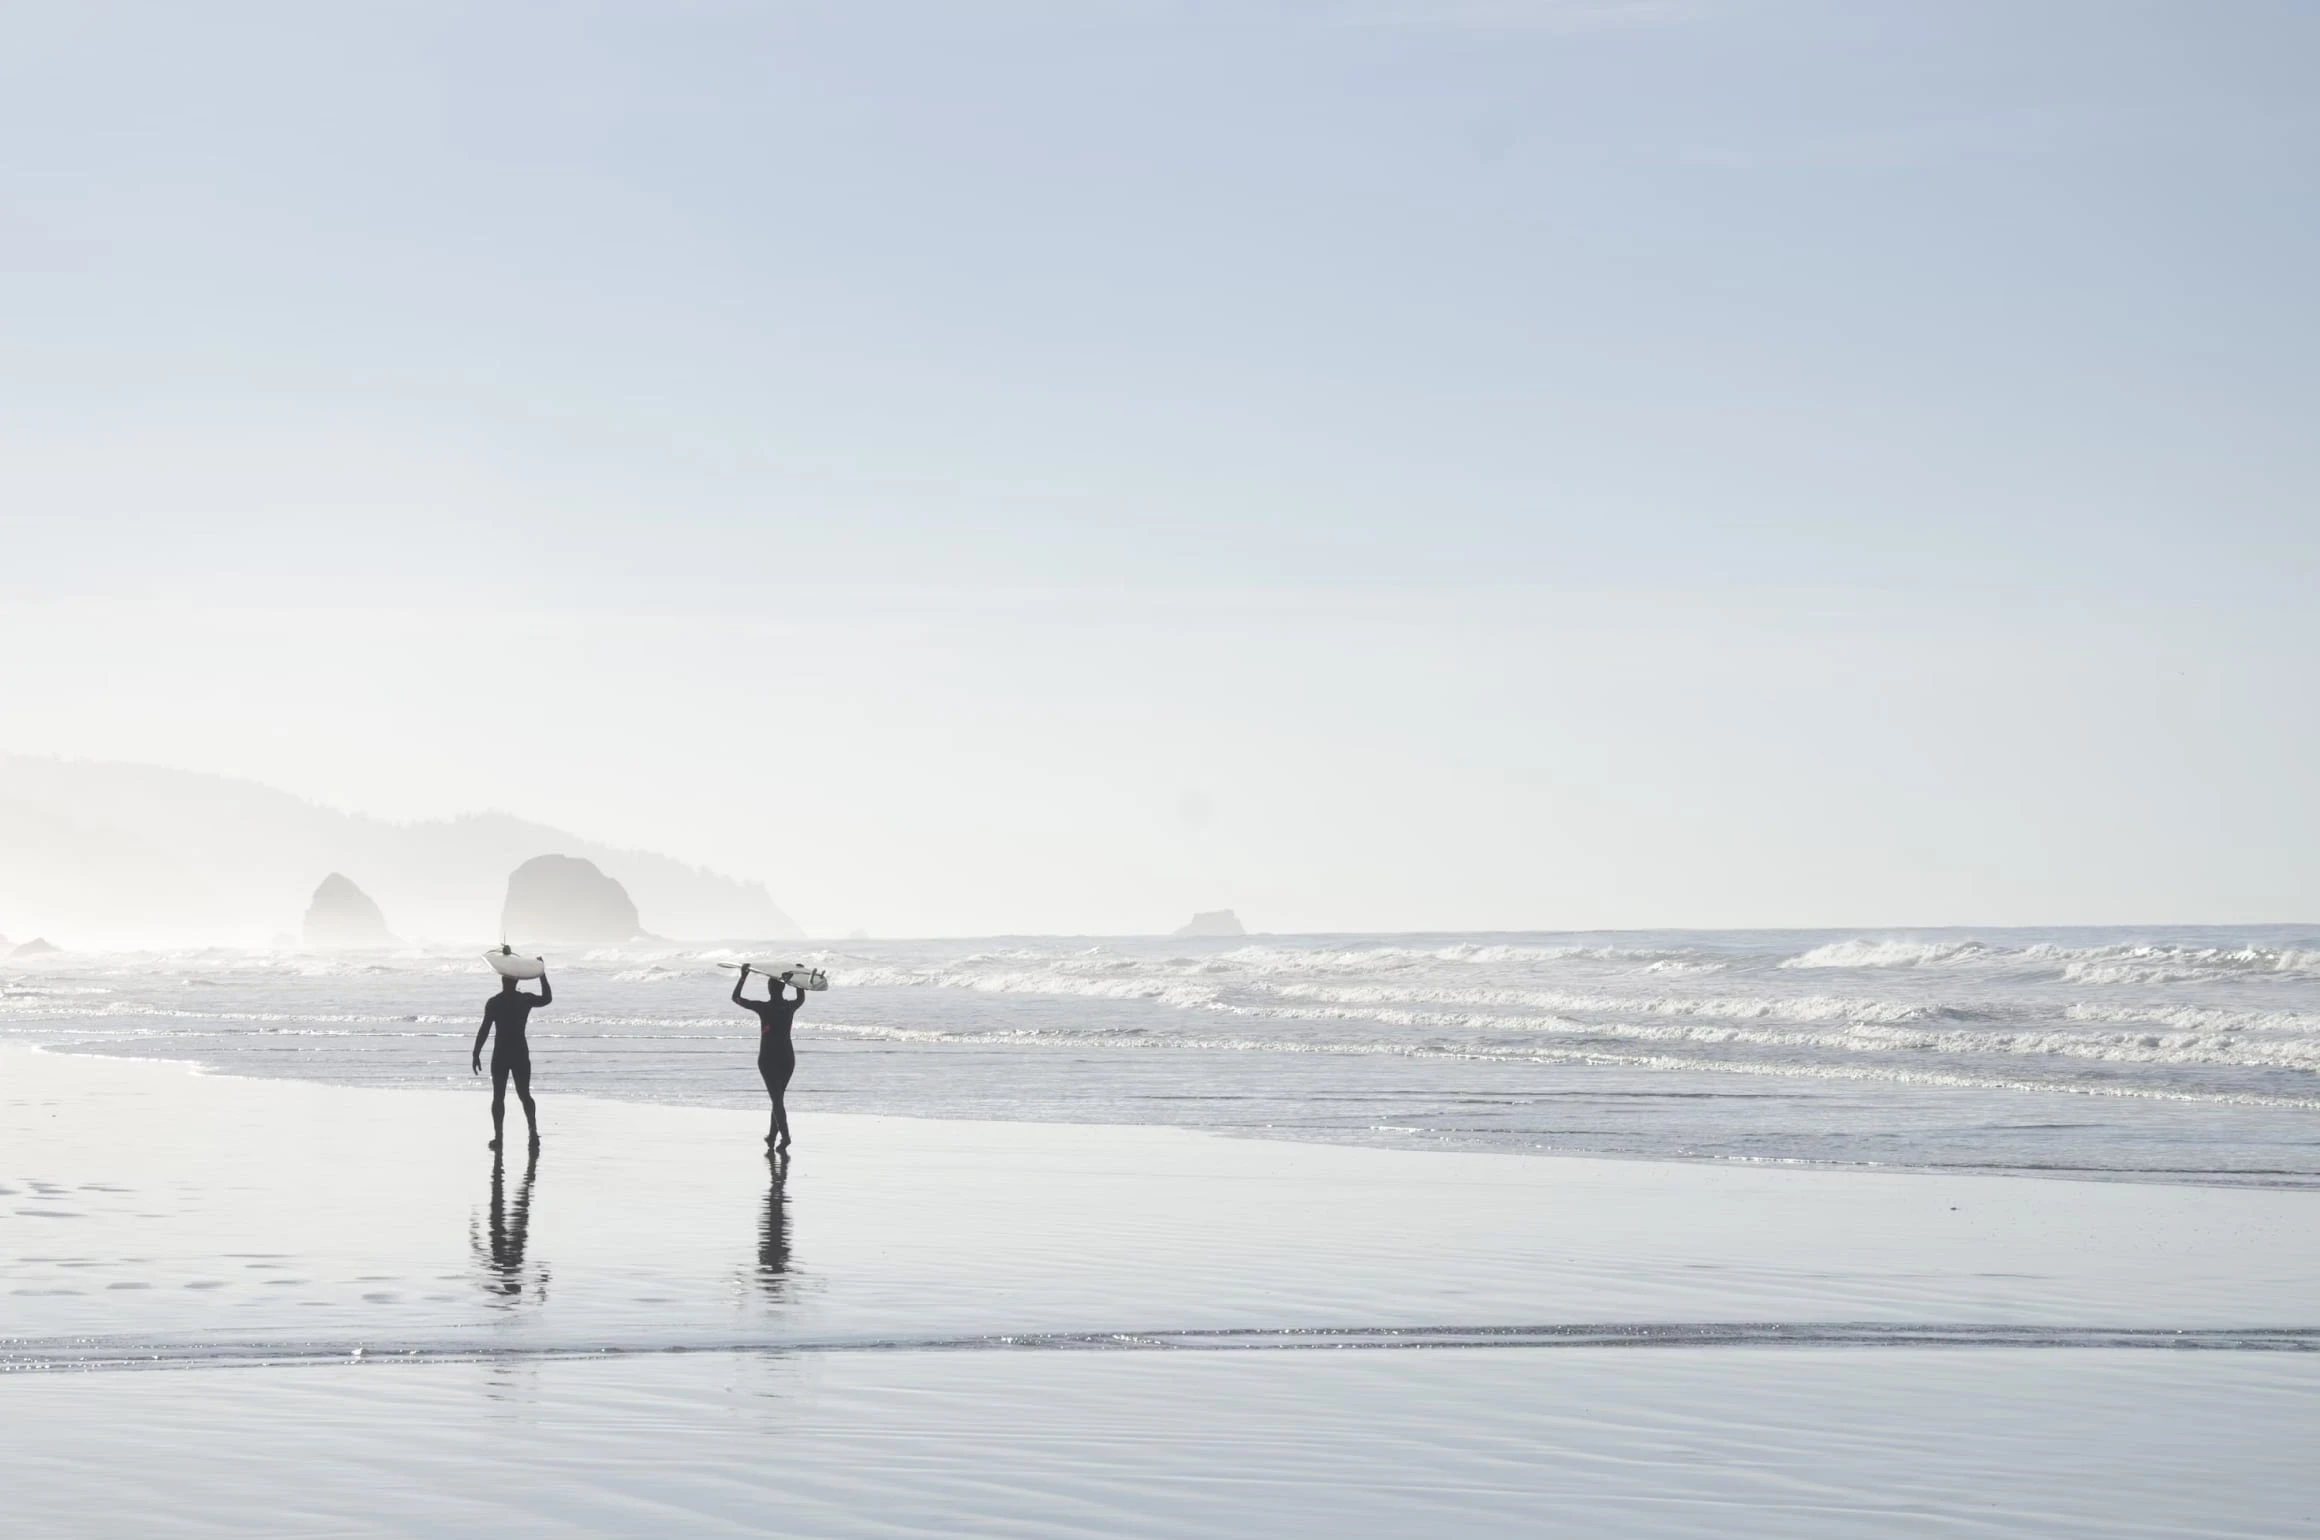 Surfer silhouettes on Cannon Beach